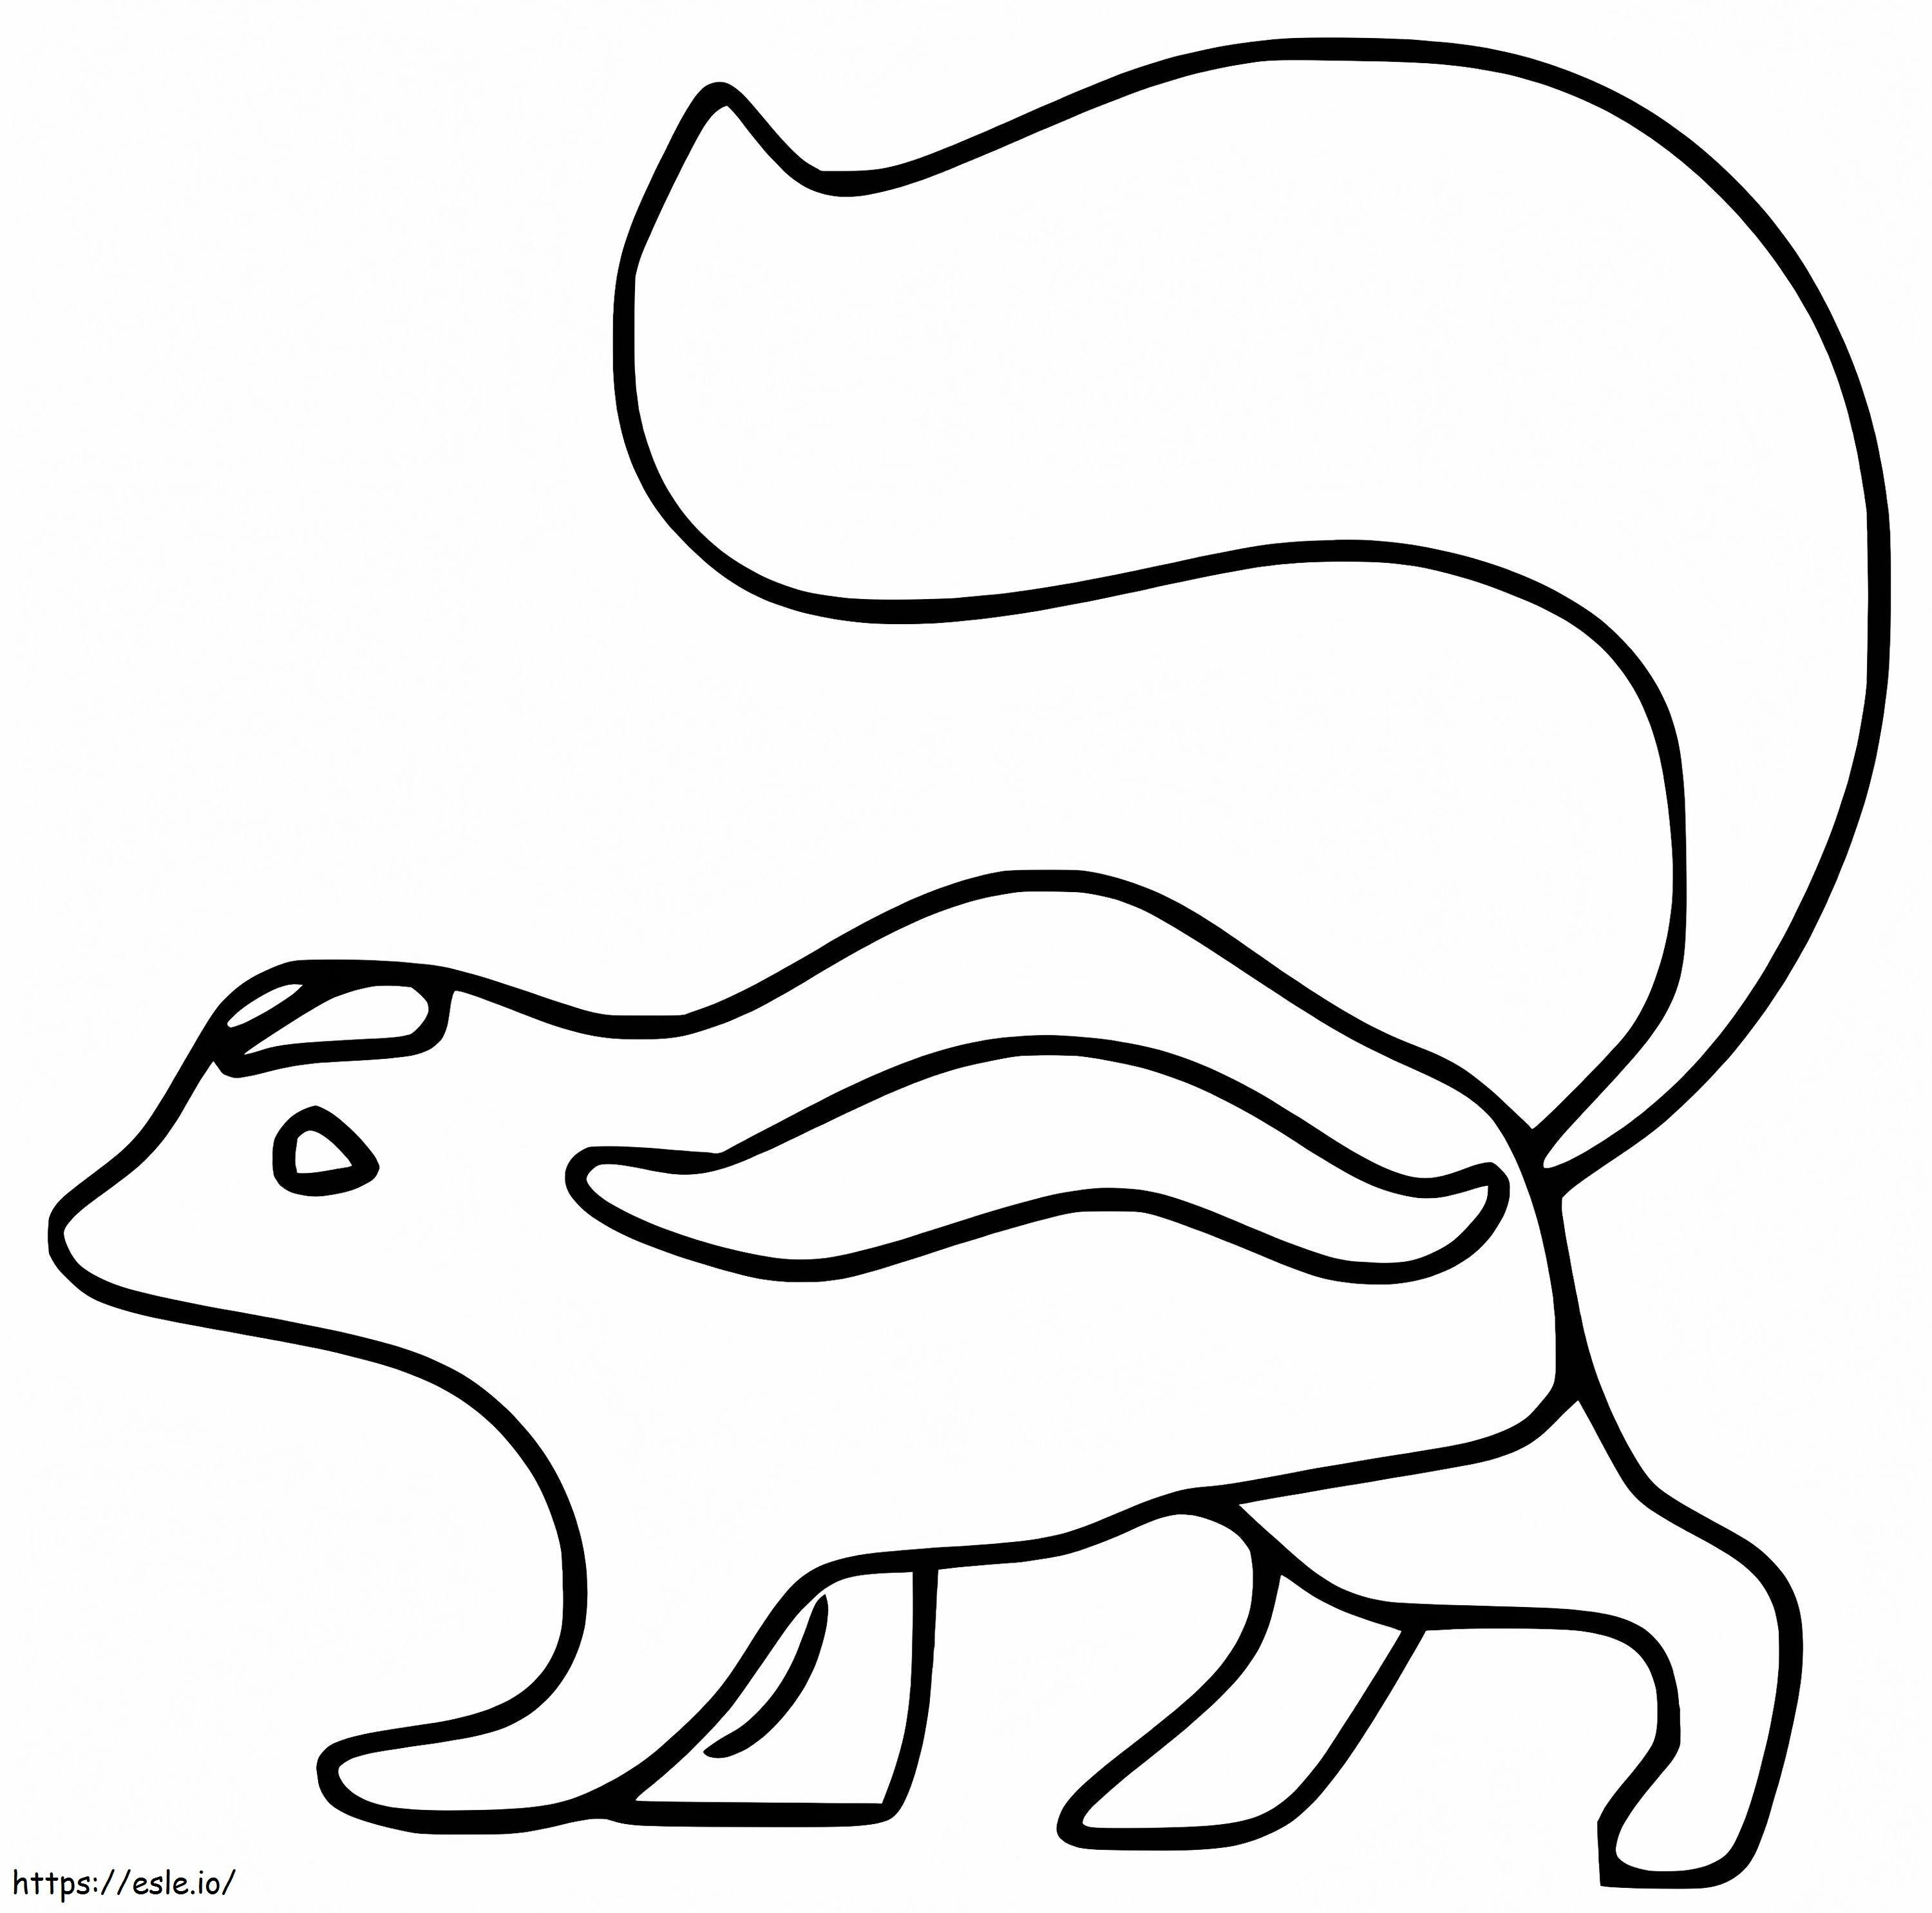 You Pass Simple coloring page